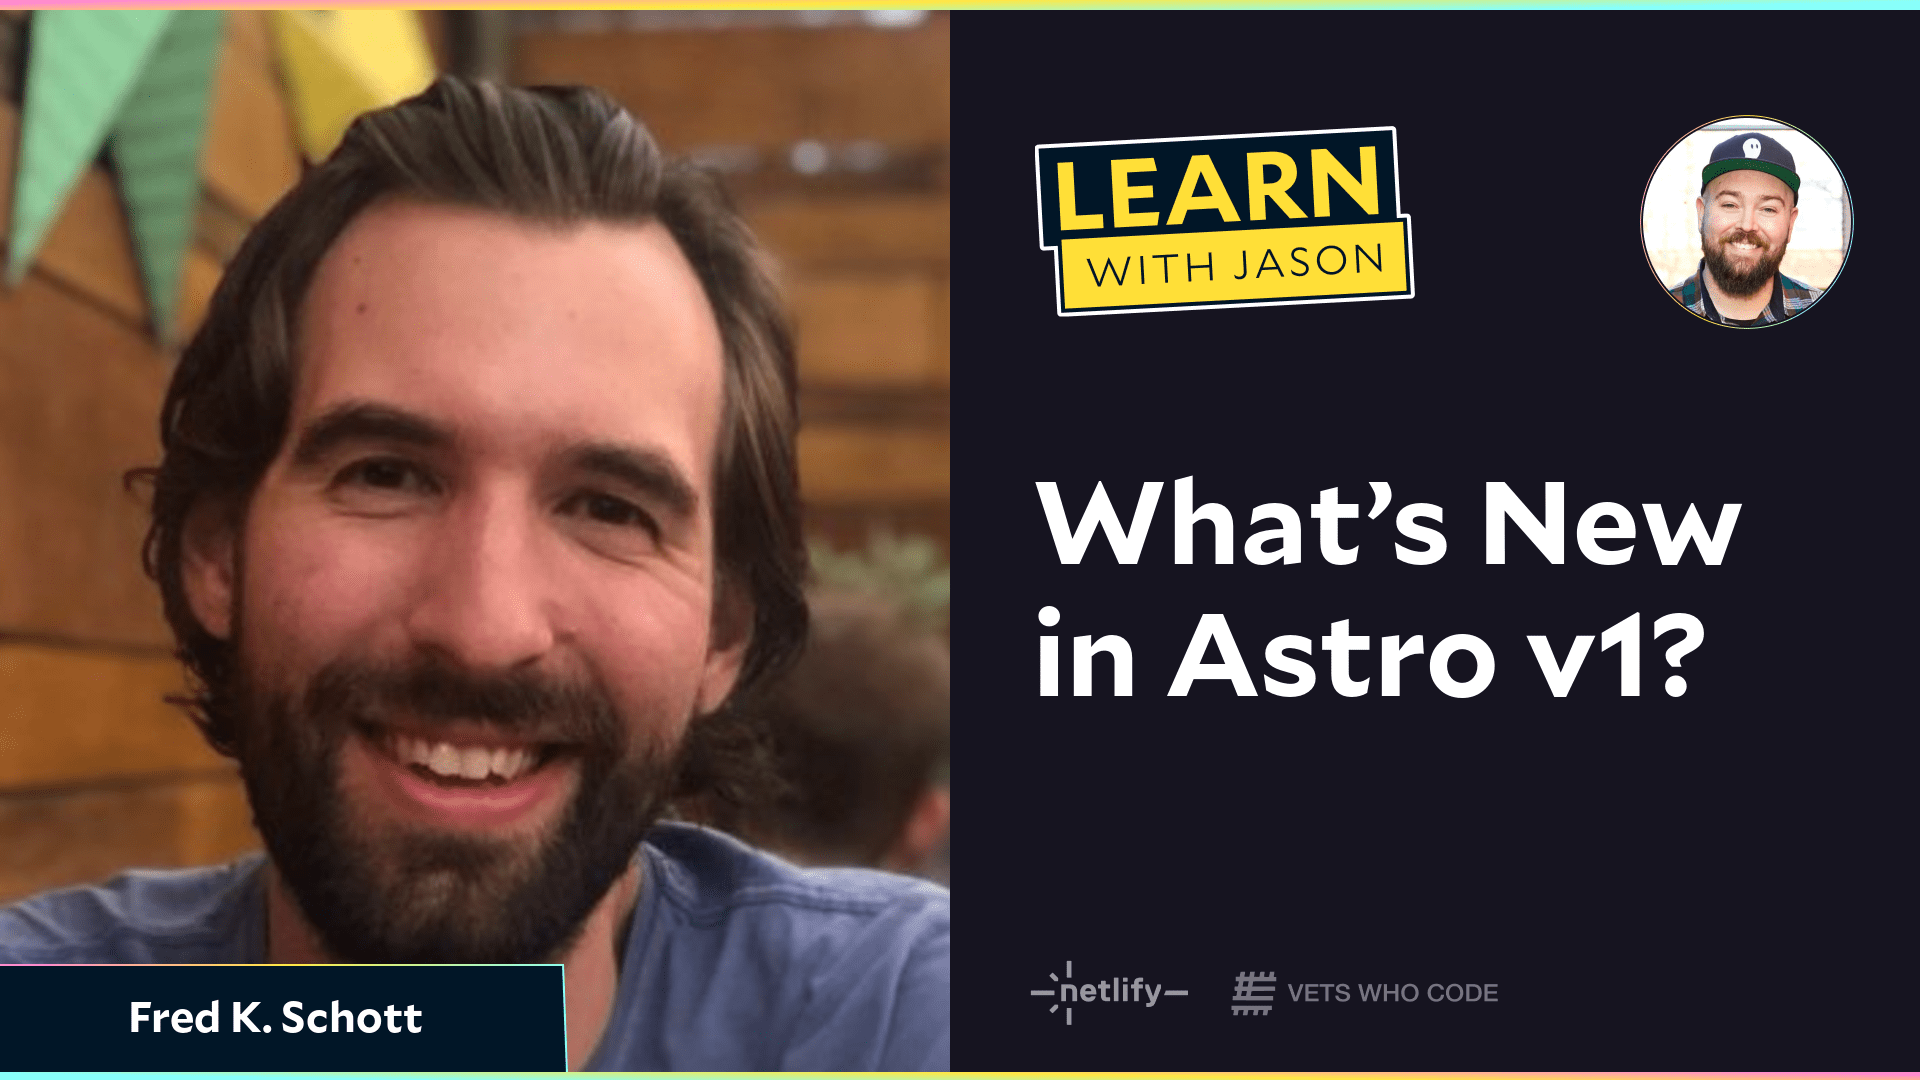 What’s New in Astro v1? (with Fred K. Schott)